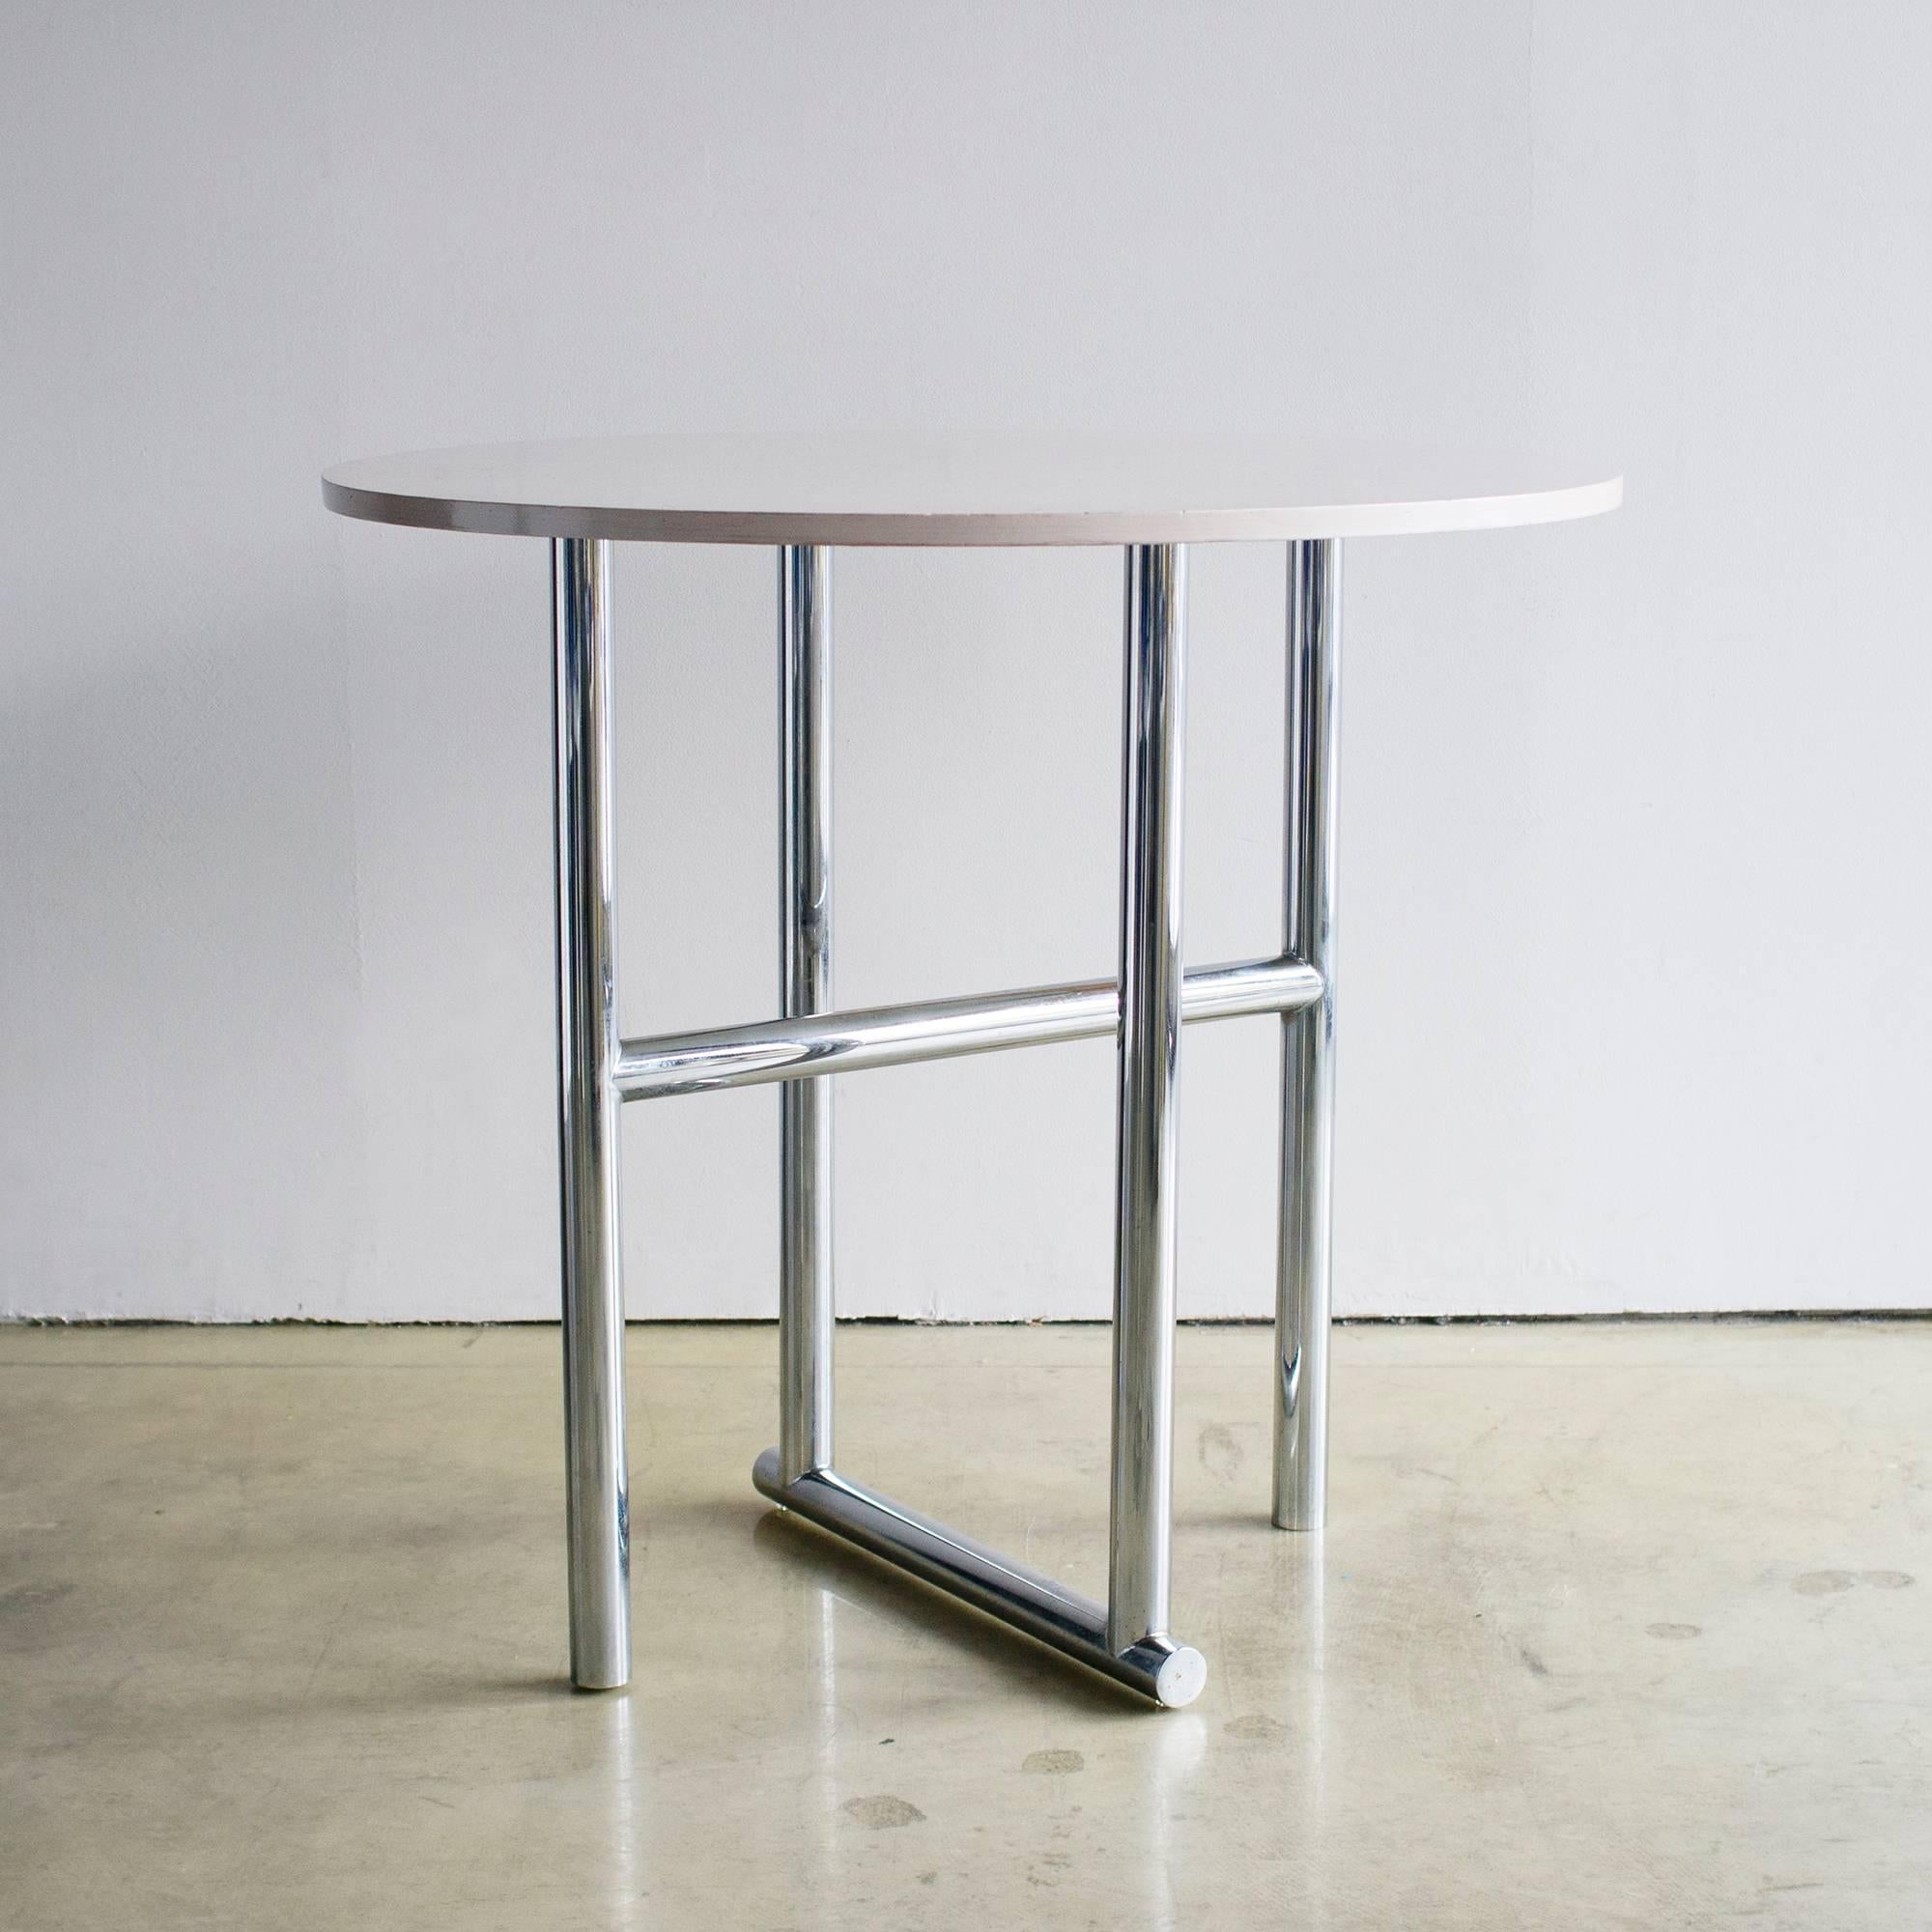 HAL1 table designed by Shiro Kuramata for Cassina Interdecor in 1988. Unique steel legs and white painted Oriented strand board.